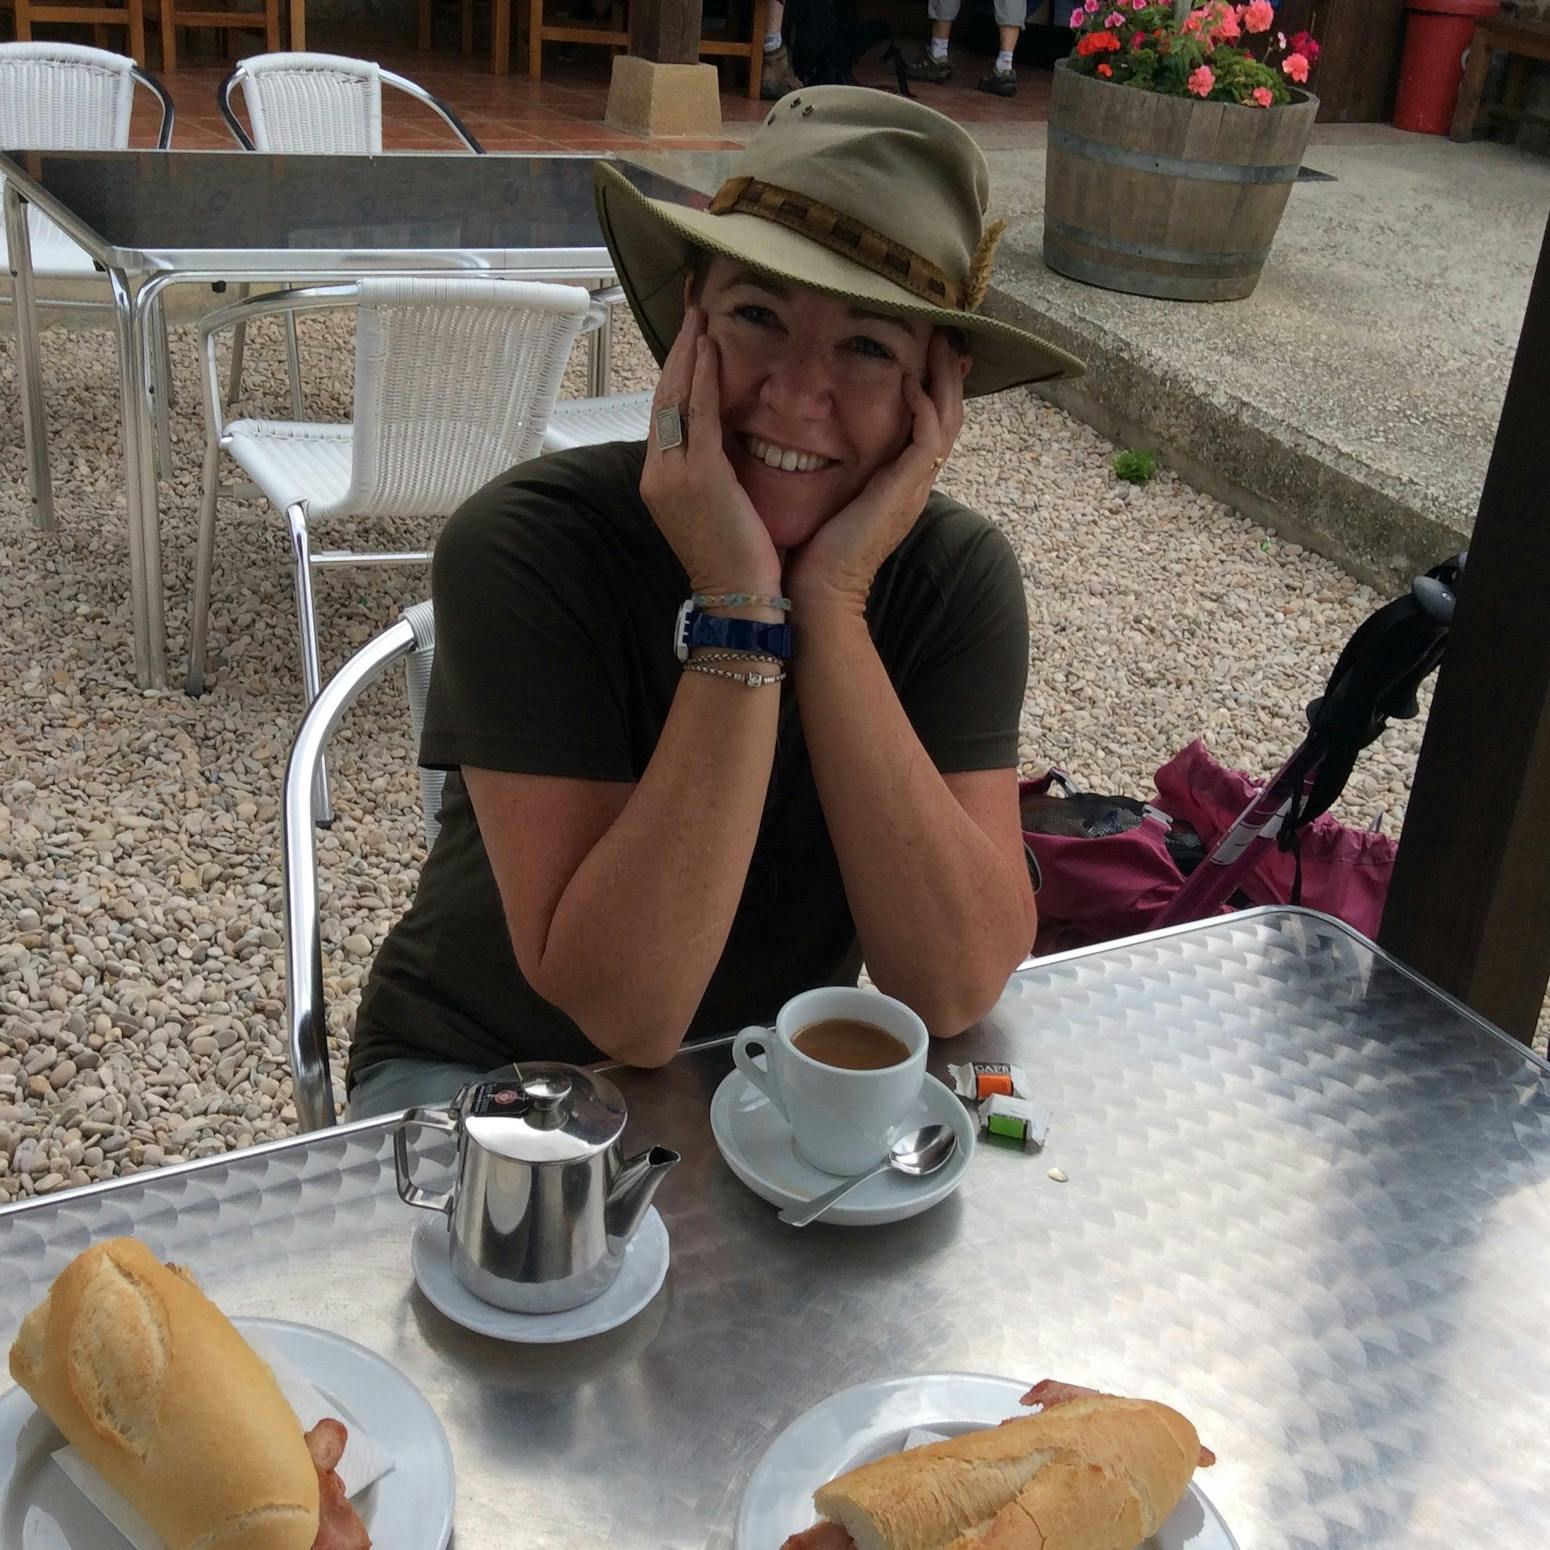 The joy of a cup and saucer on the Camino